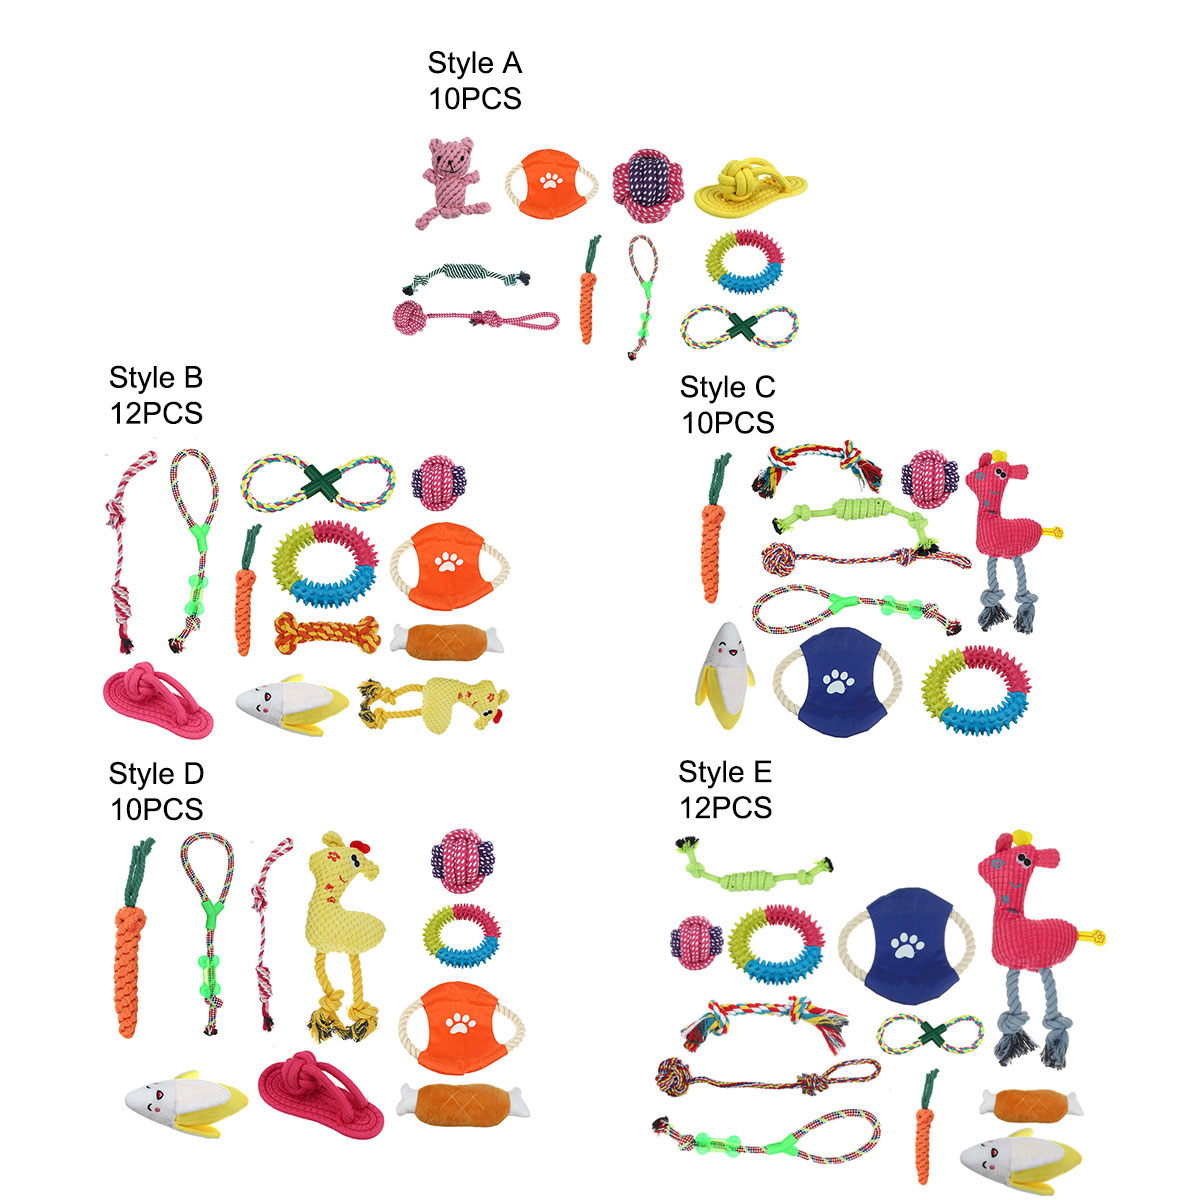 12x-Assorted-Dog-Puppy-Pet-Toys-Ropes-Chew-Ball-Knot-Training-Play-Bundle-Cotton-1953112-1